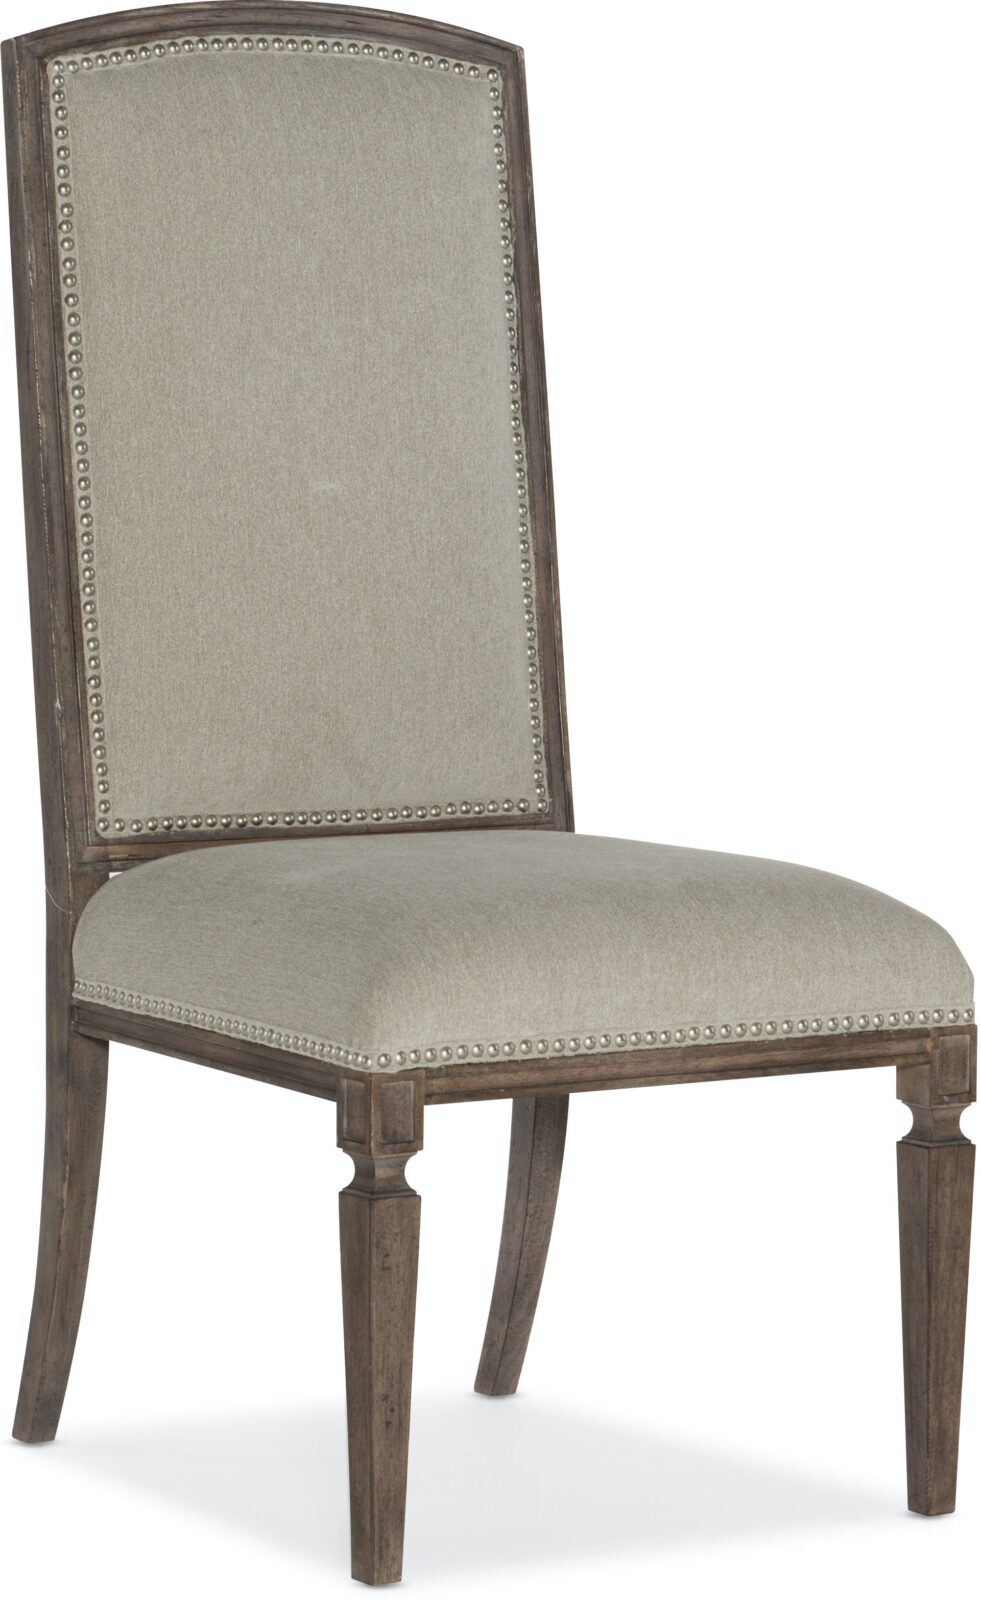 Woodlands Arched upholstered side chair